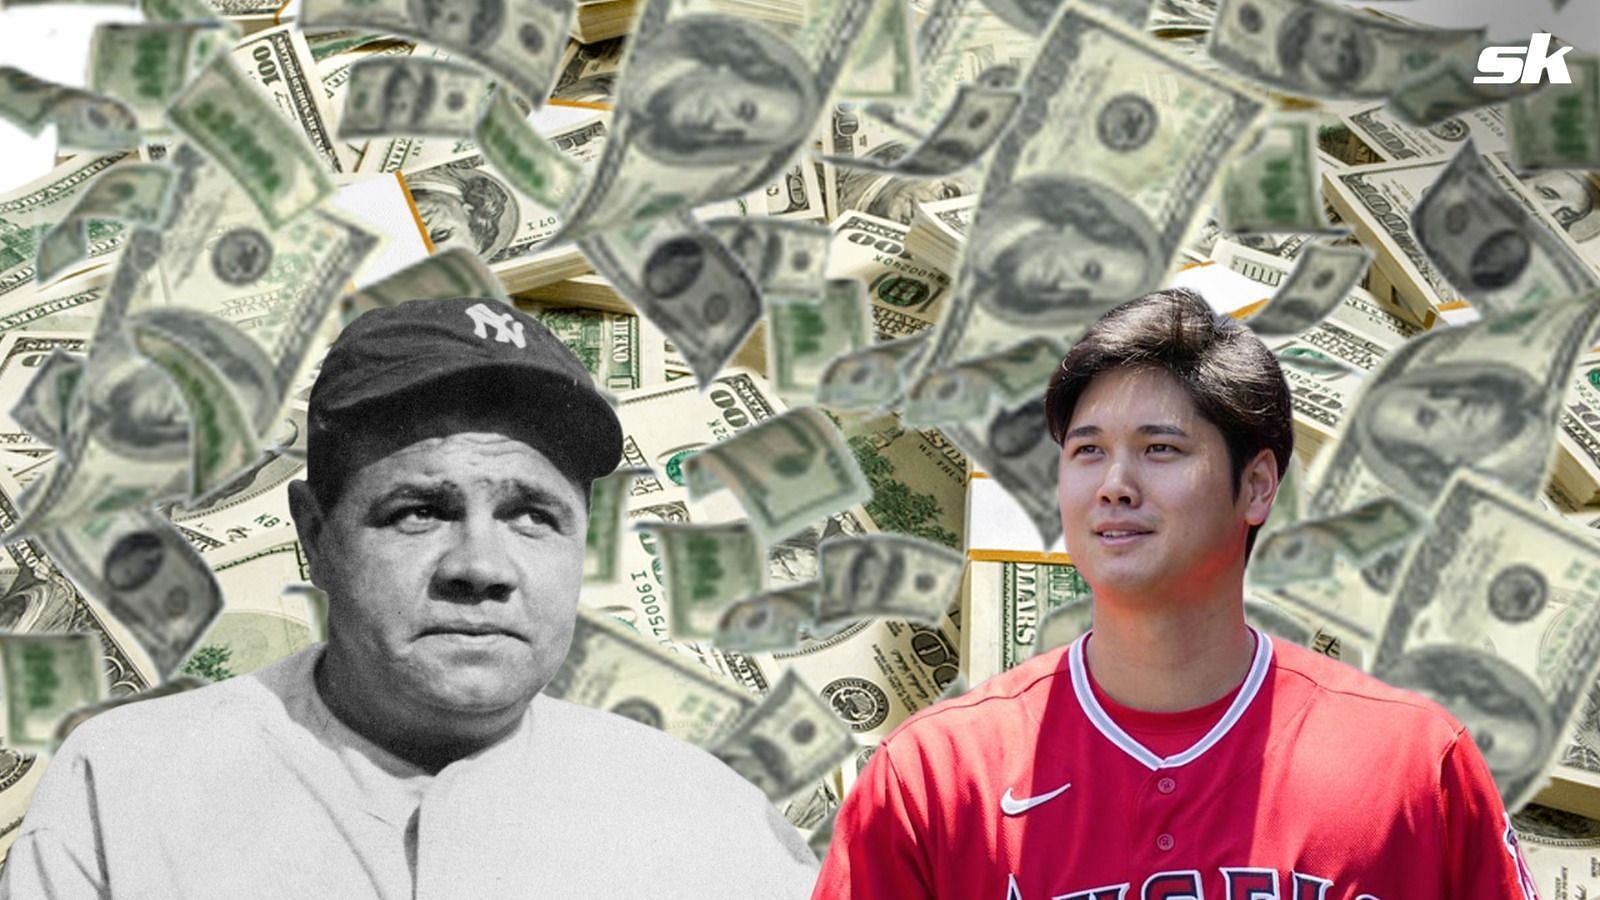 Babe Ruth of the New York Yankees and Shohei Ohtani of the Los Angeles Angels